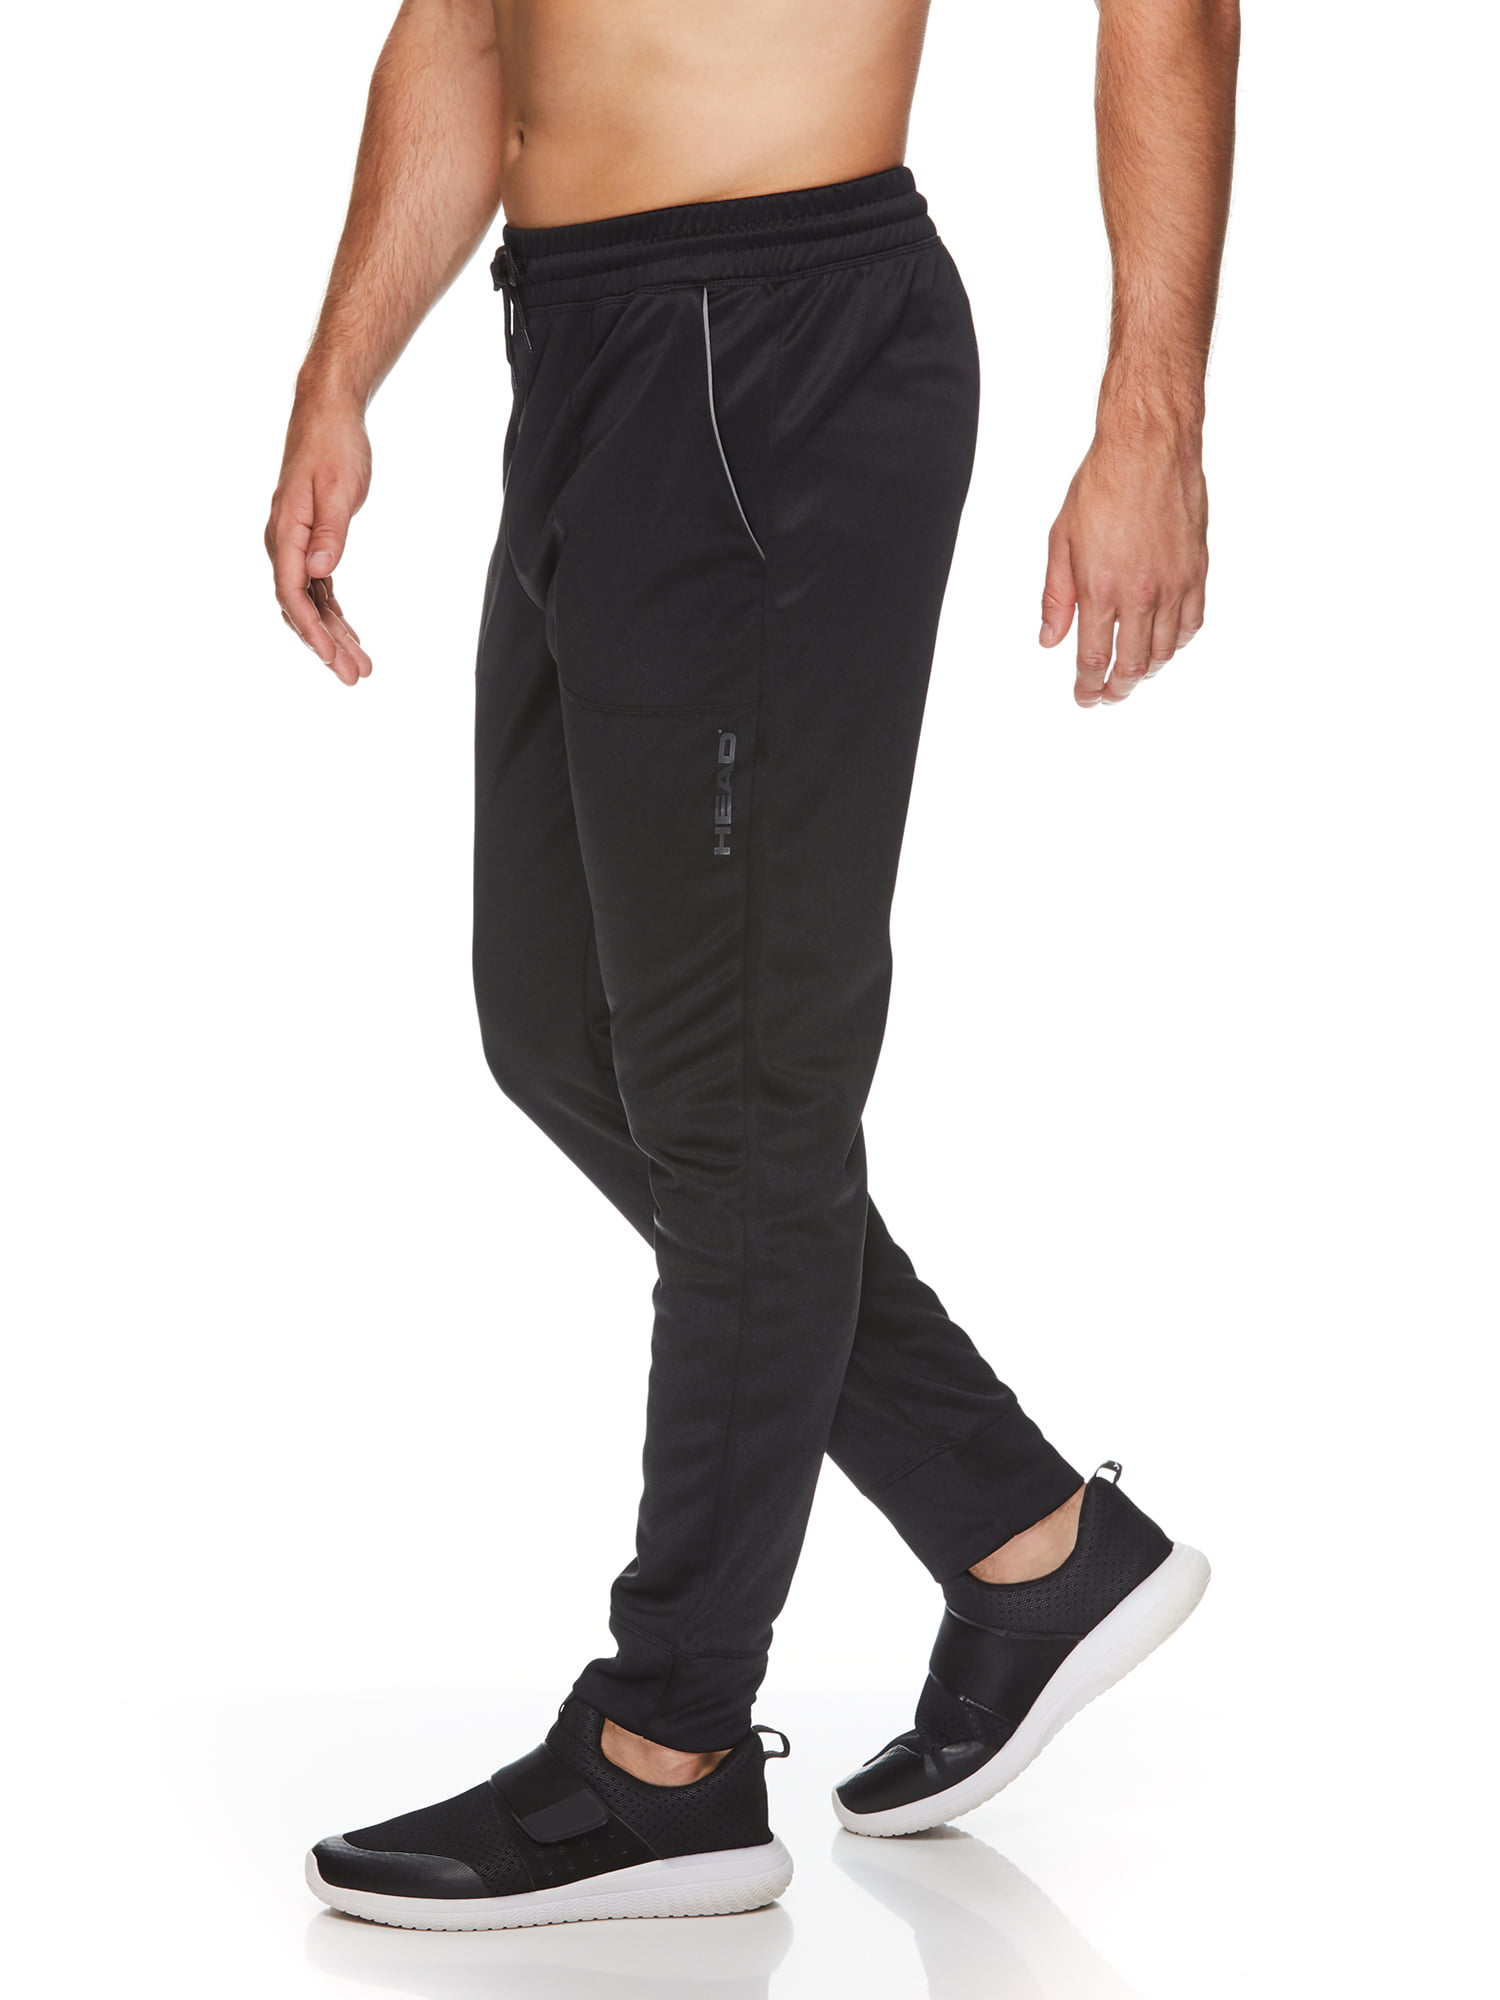 Performance Athletic Workout & Training Sweatpants HEAD Mens Running Pants